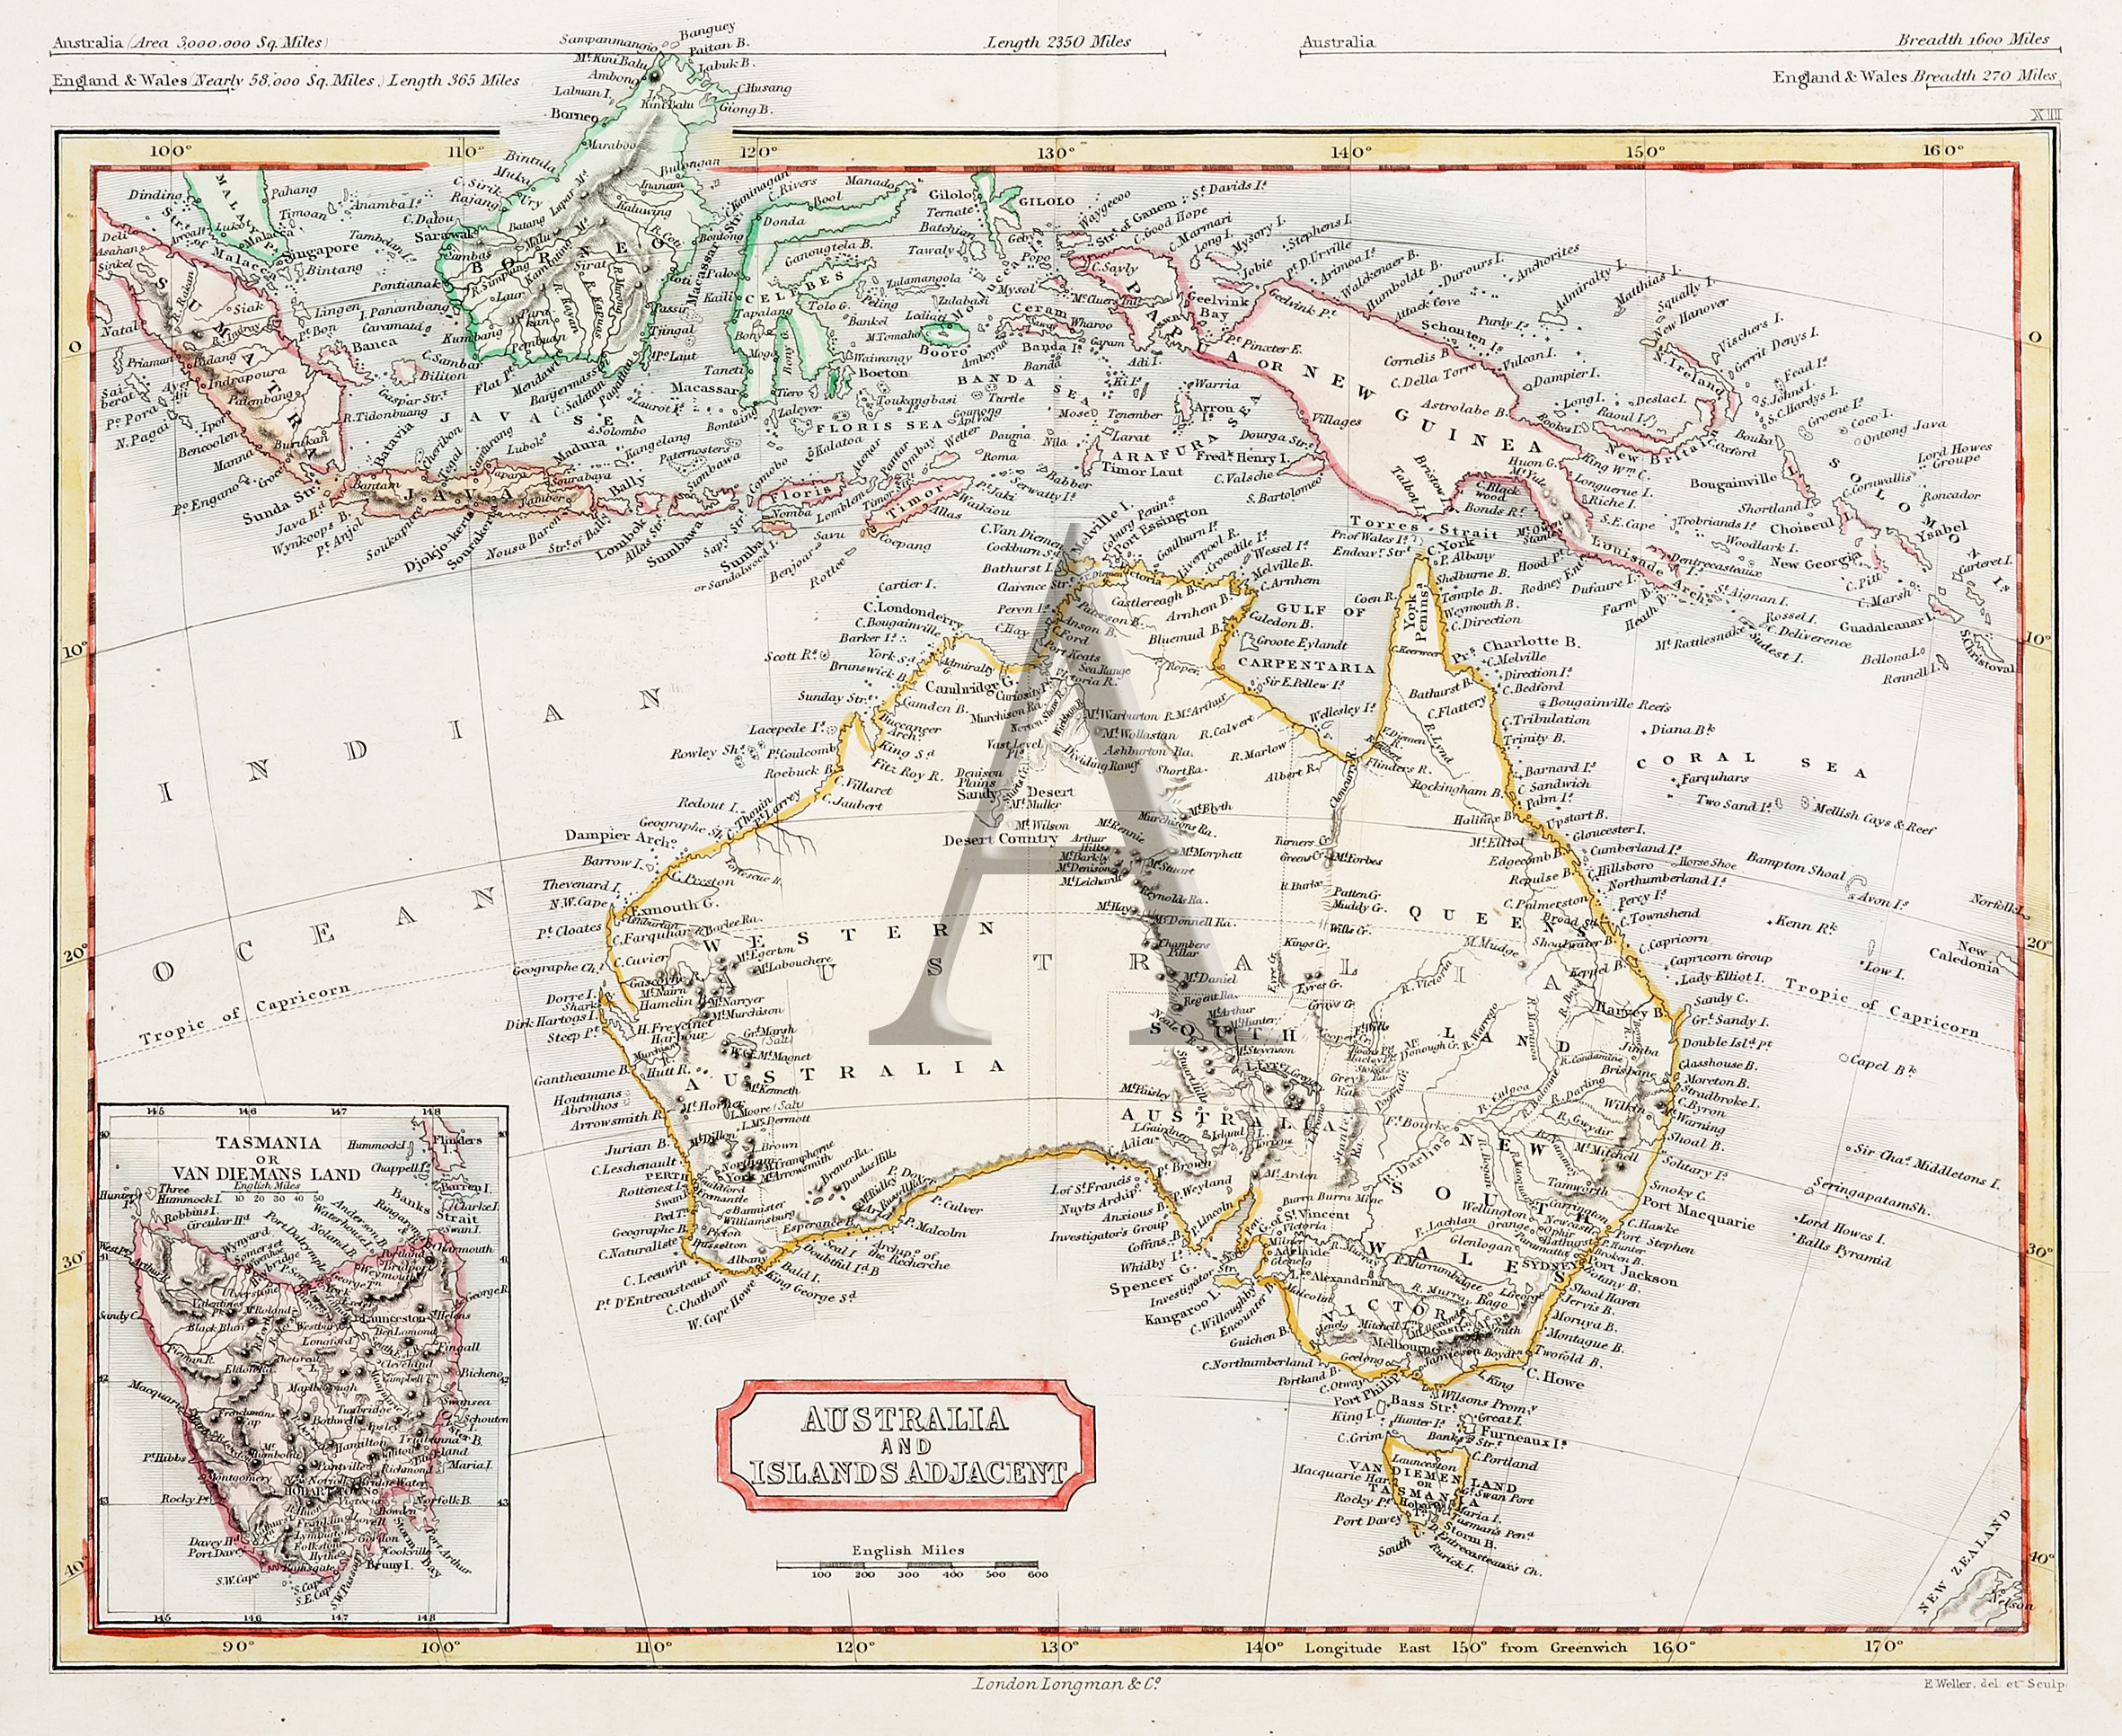 Australia and Islands Adjacent. - Antique Print from 1830